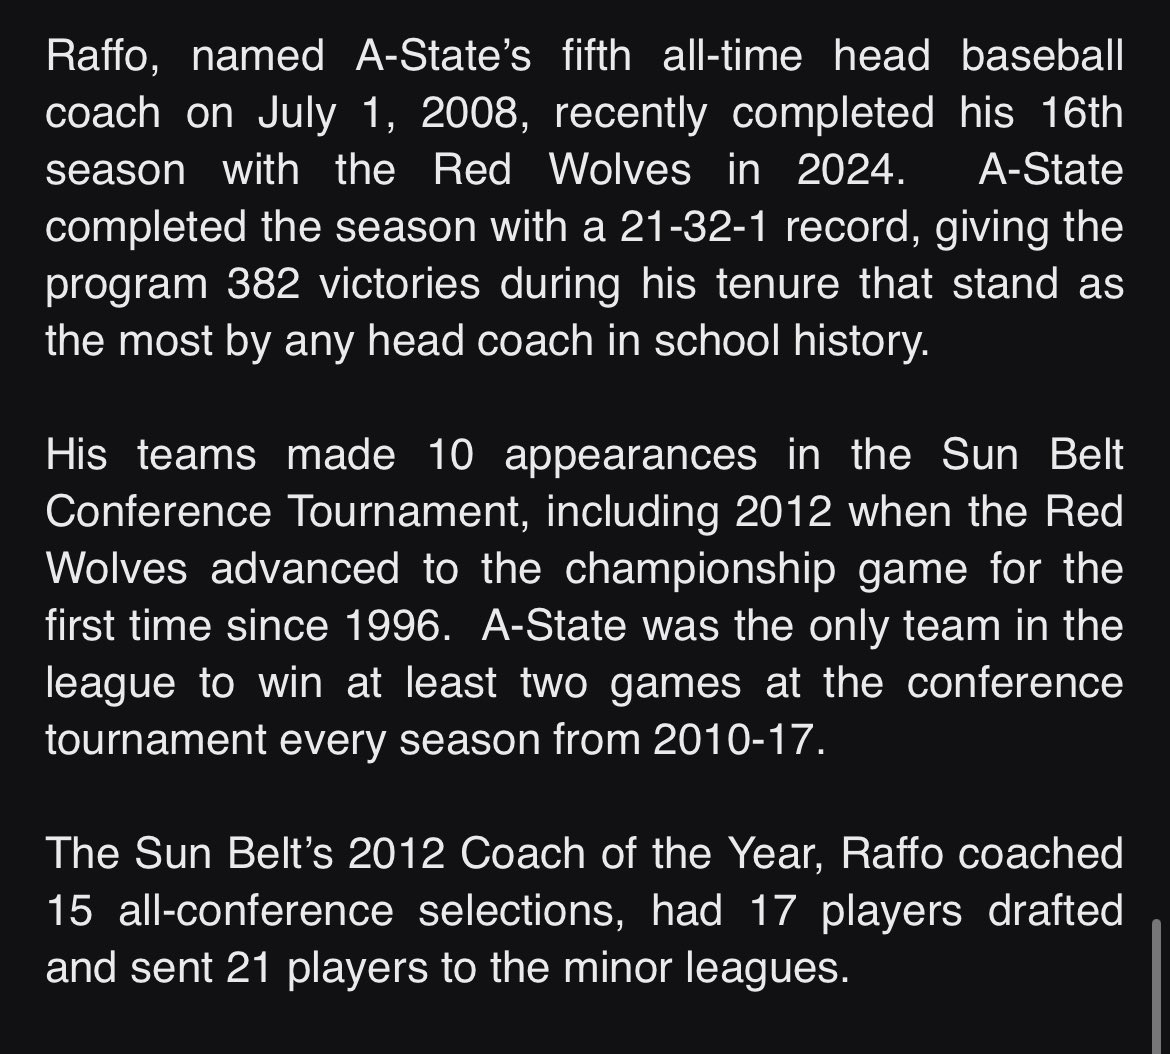 Arkansas State Athletics and Vice Chancelor for Intercollegiate Athletics Jeff Purinton have officially announced a change in leadership for #AState baseball. Coach Tommy Raffo was at the helm for 16 seasons.